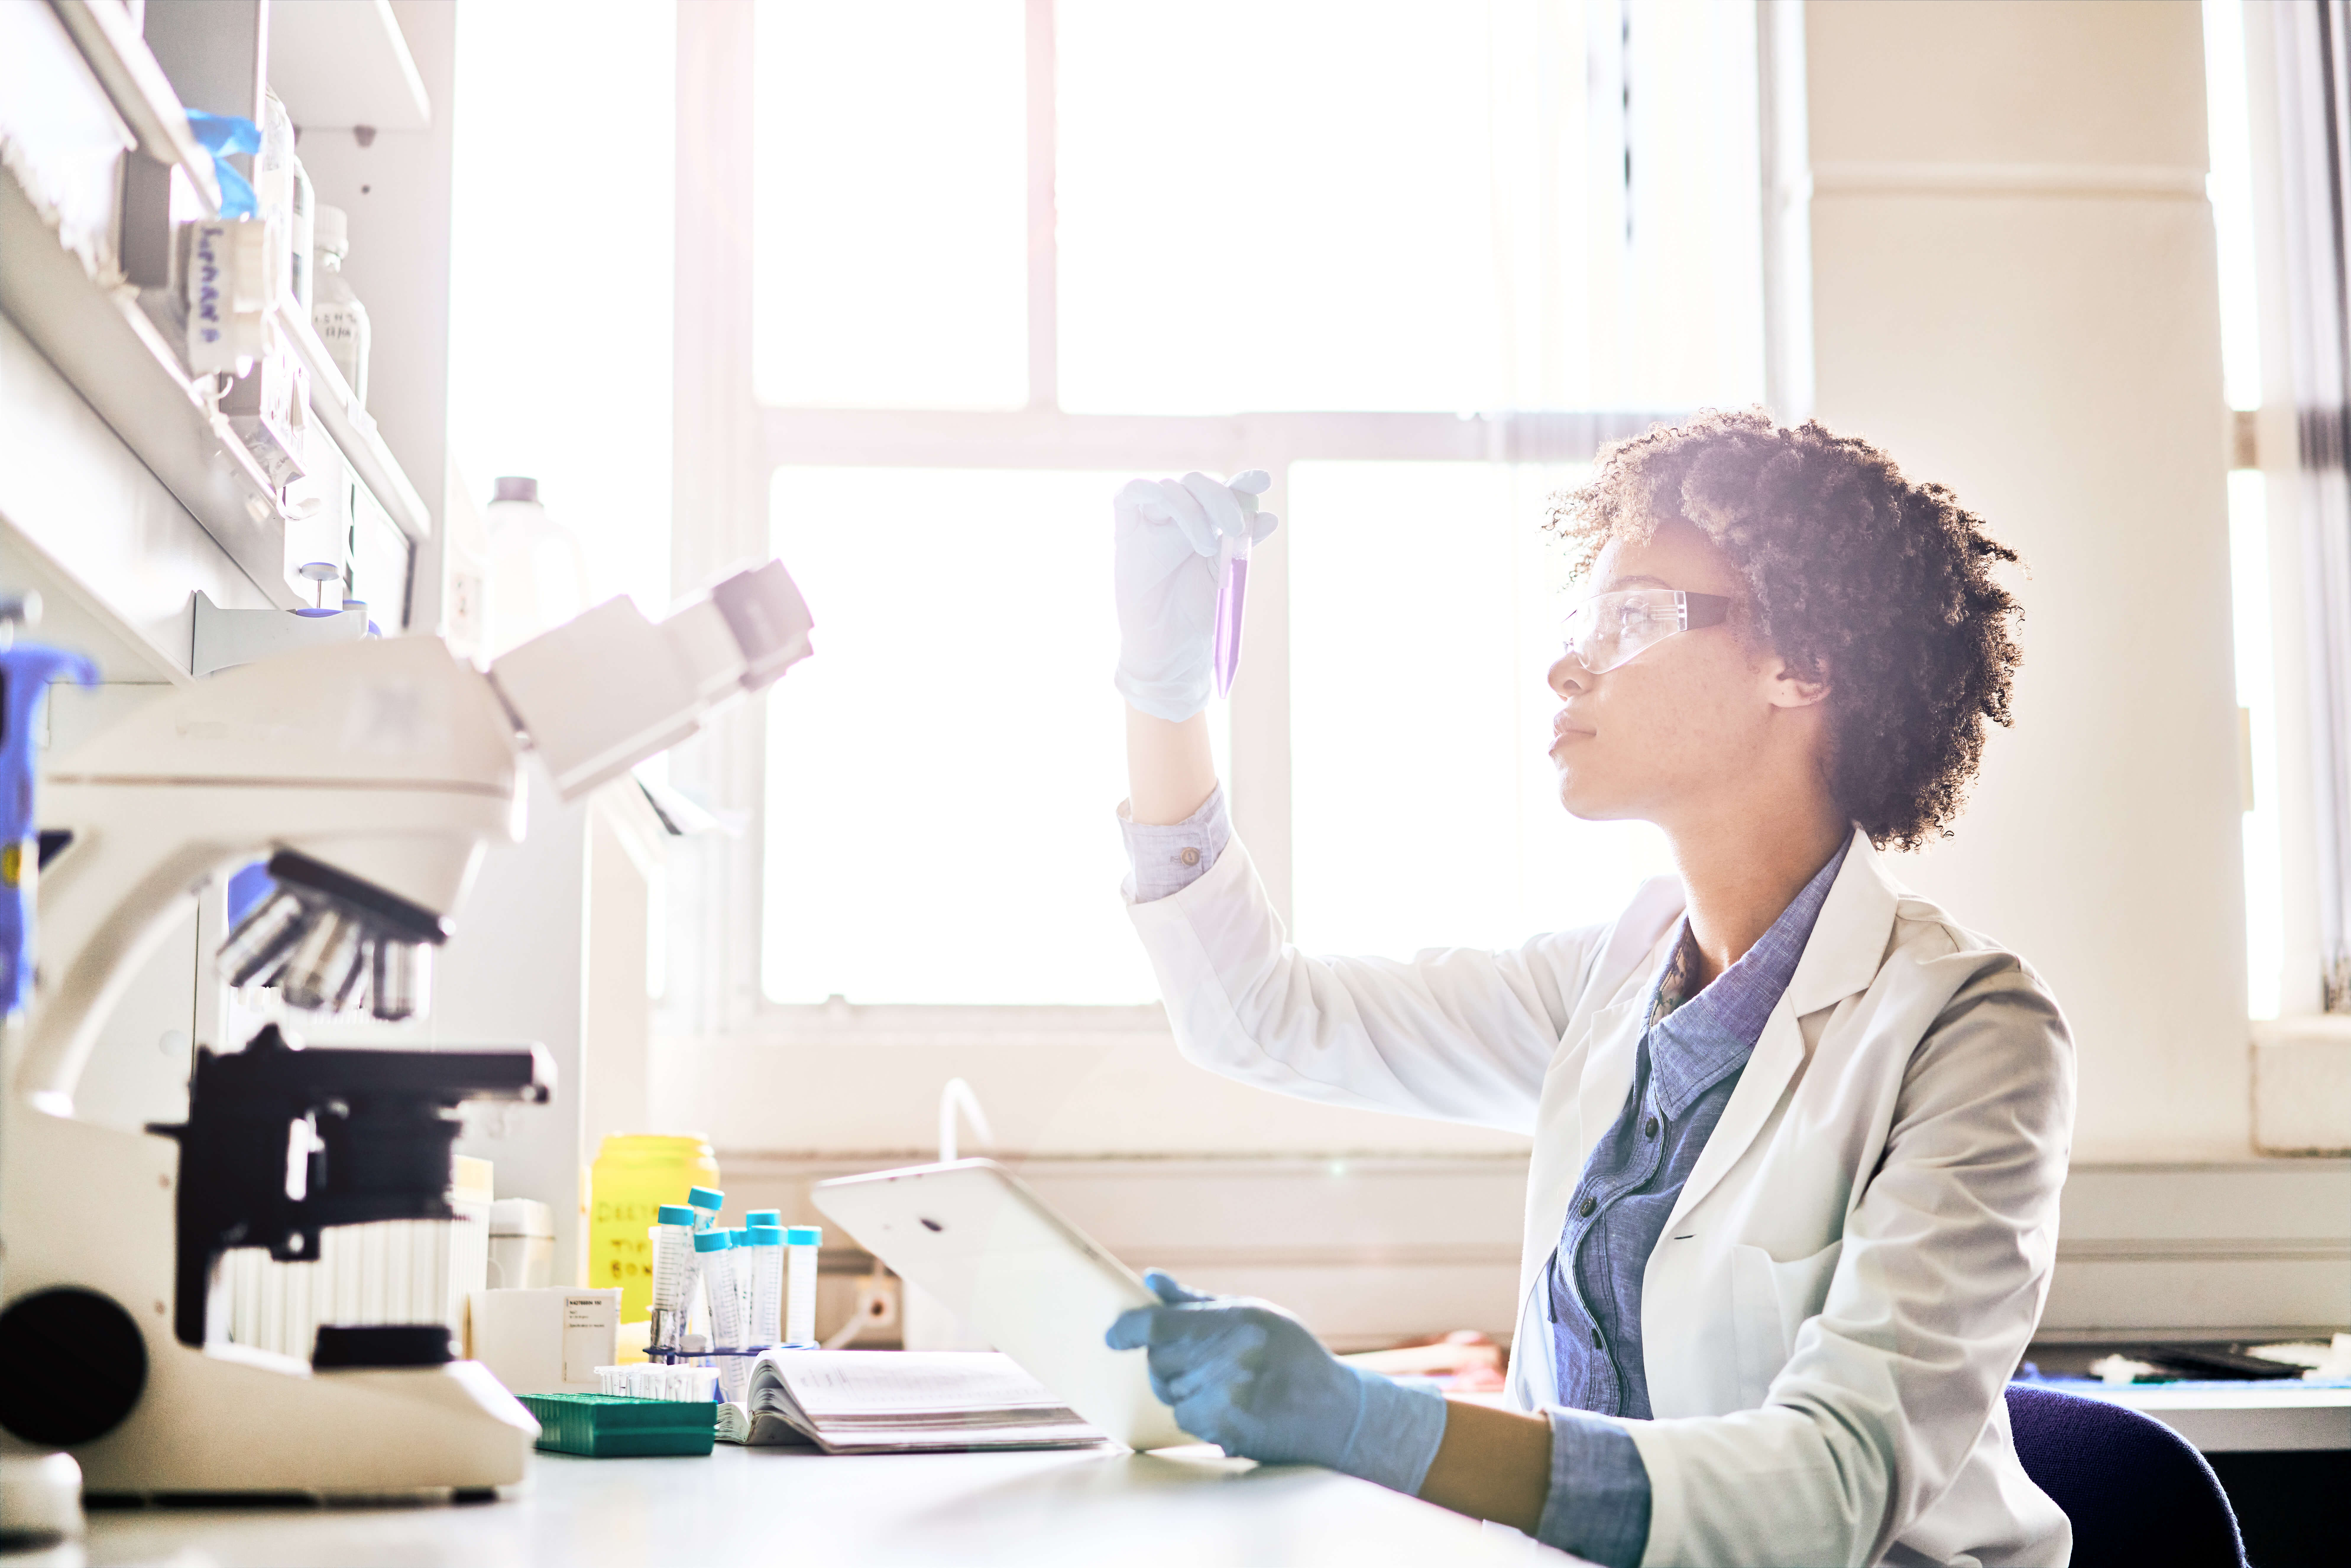 Young female scientist working on a digital tablet and examining a test tube sample while sitting at a table in a lab